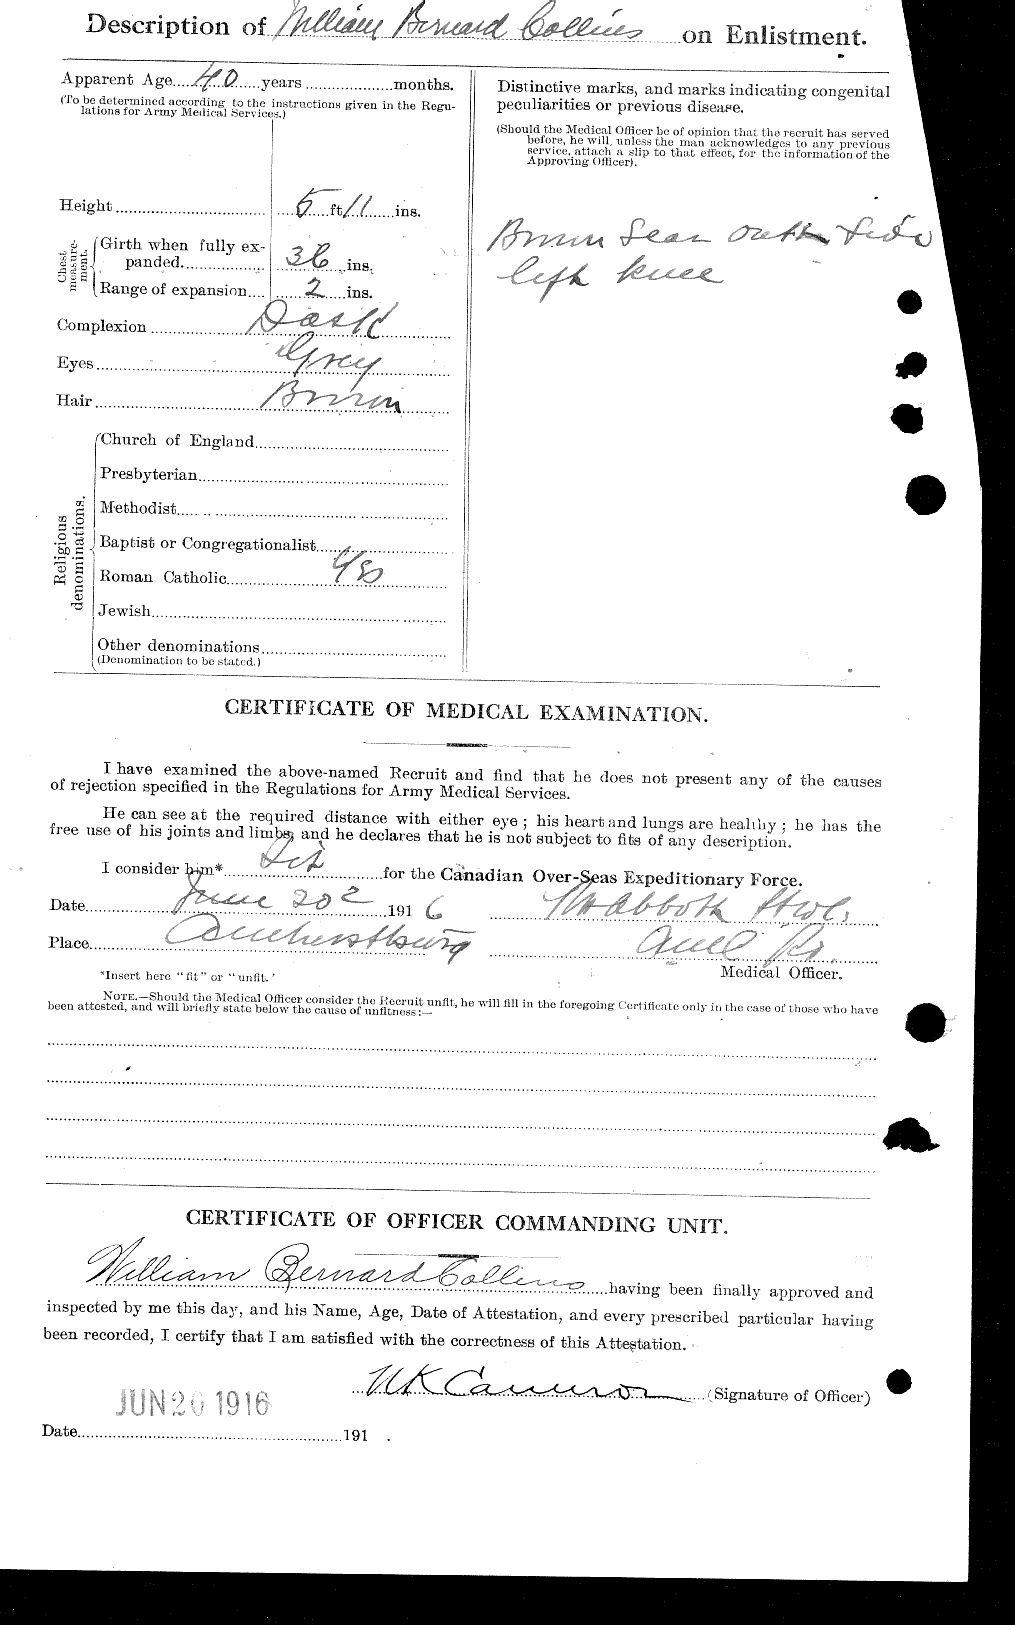 Personnel Records of the First World War - CEF 034591b